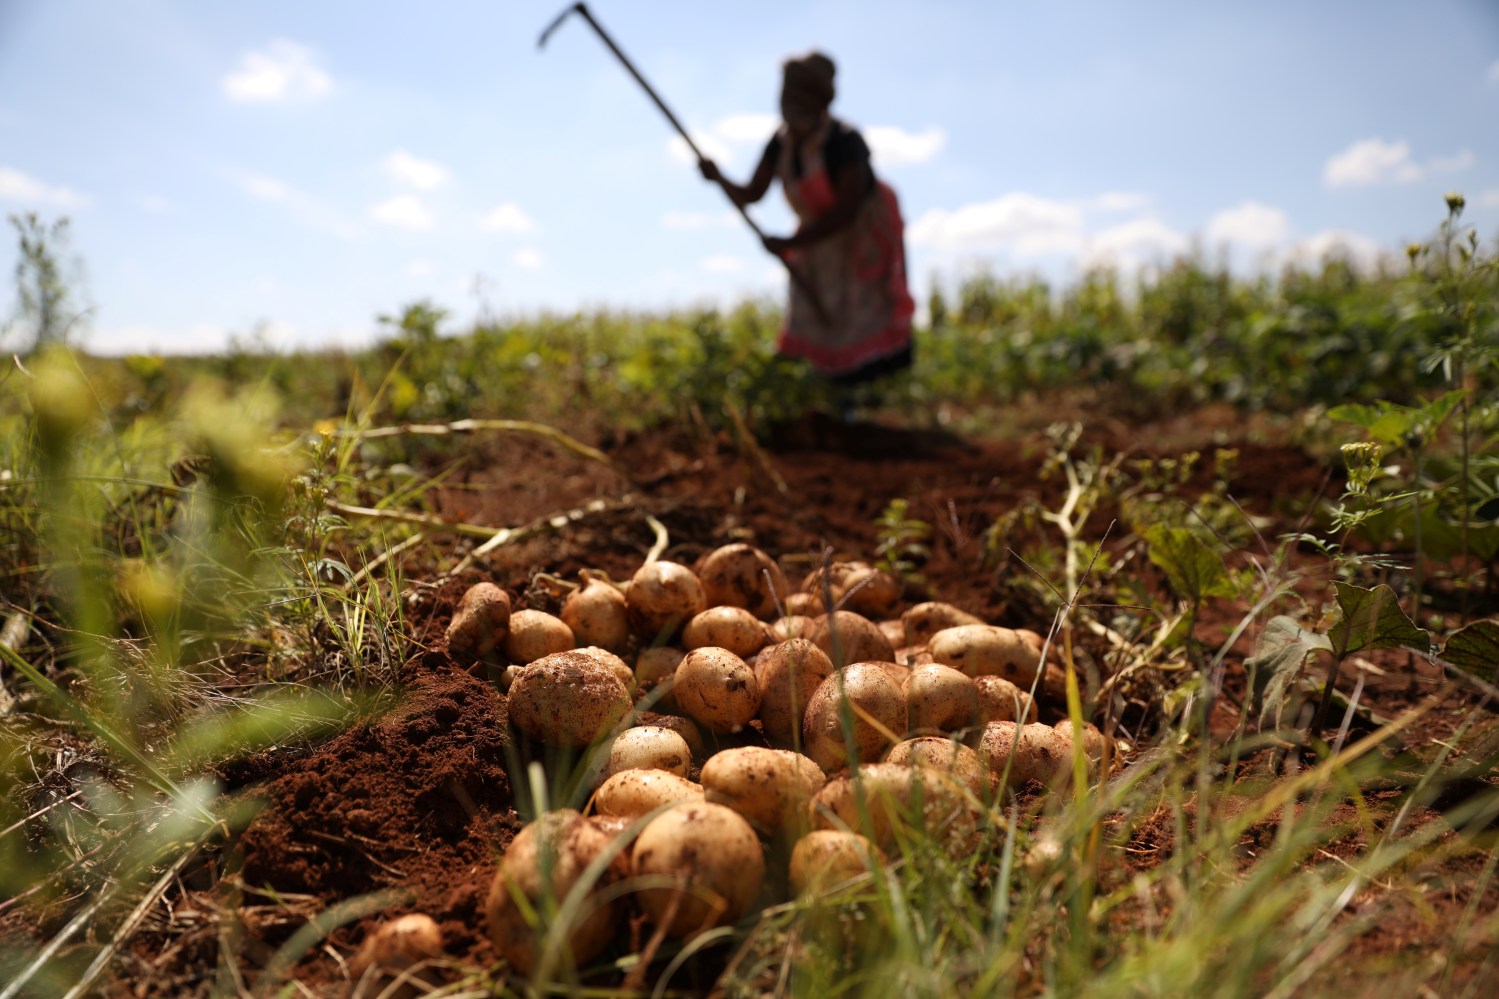 Nobutho Thethani harvests potatoes at her farm in Lawley informal settlement in the south of Johannesburg, South Africa, April 9, 2019. Picture taken April 9,2019. REUTERS/Siphiwe Sibeko